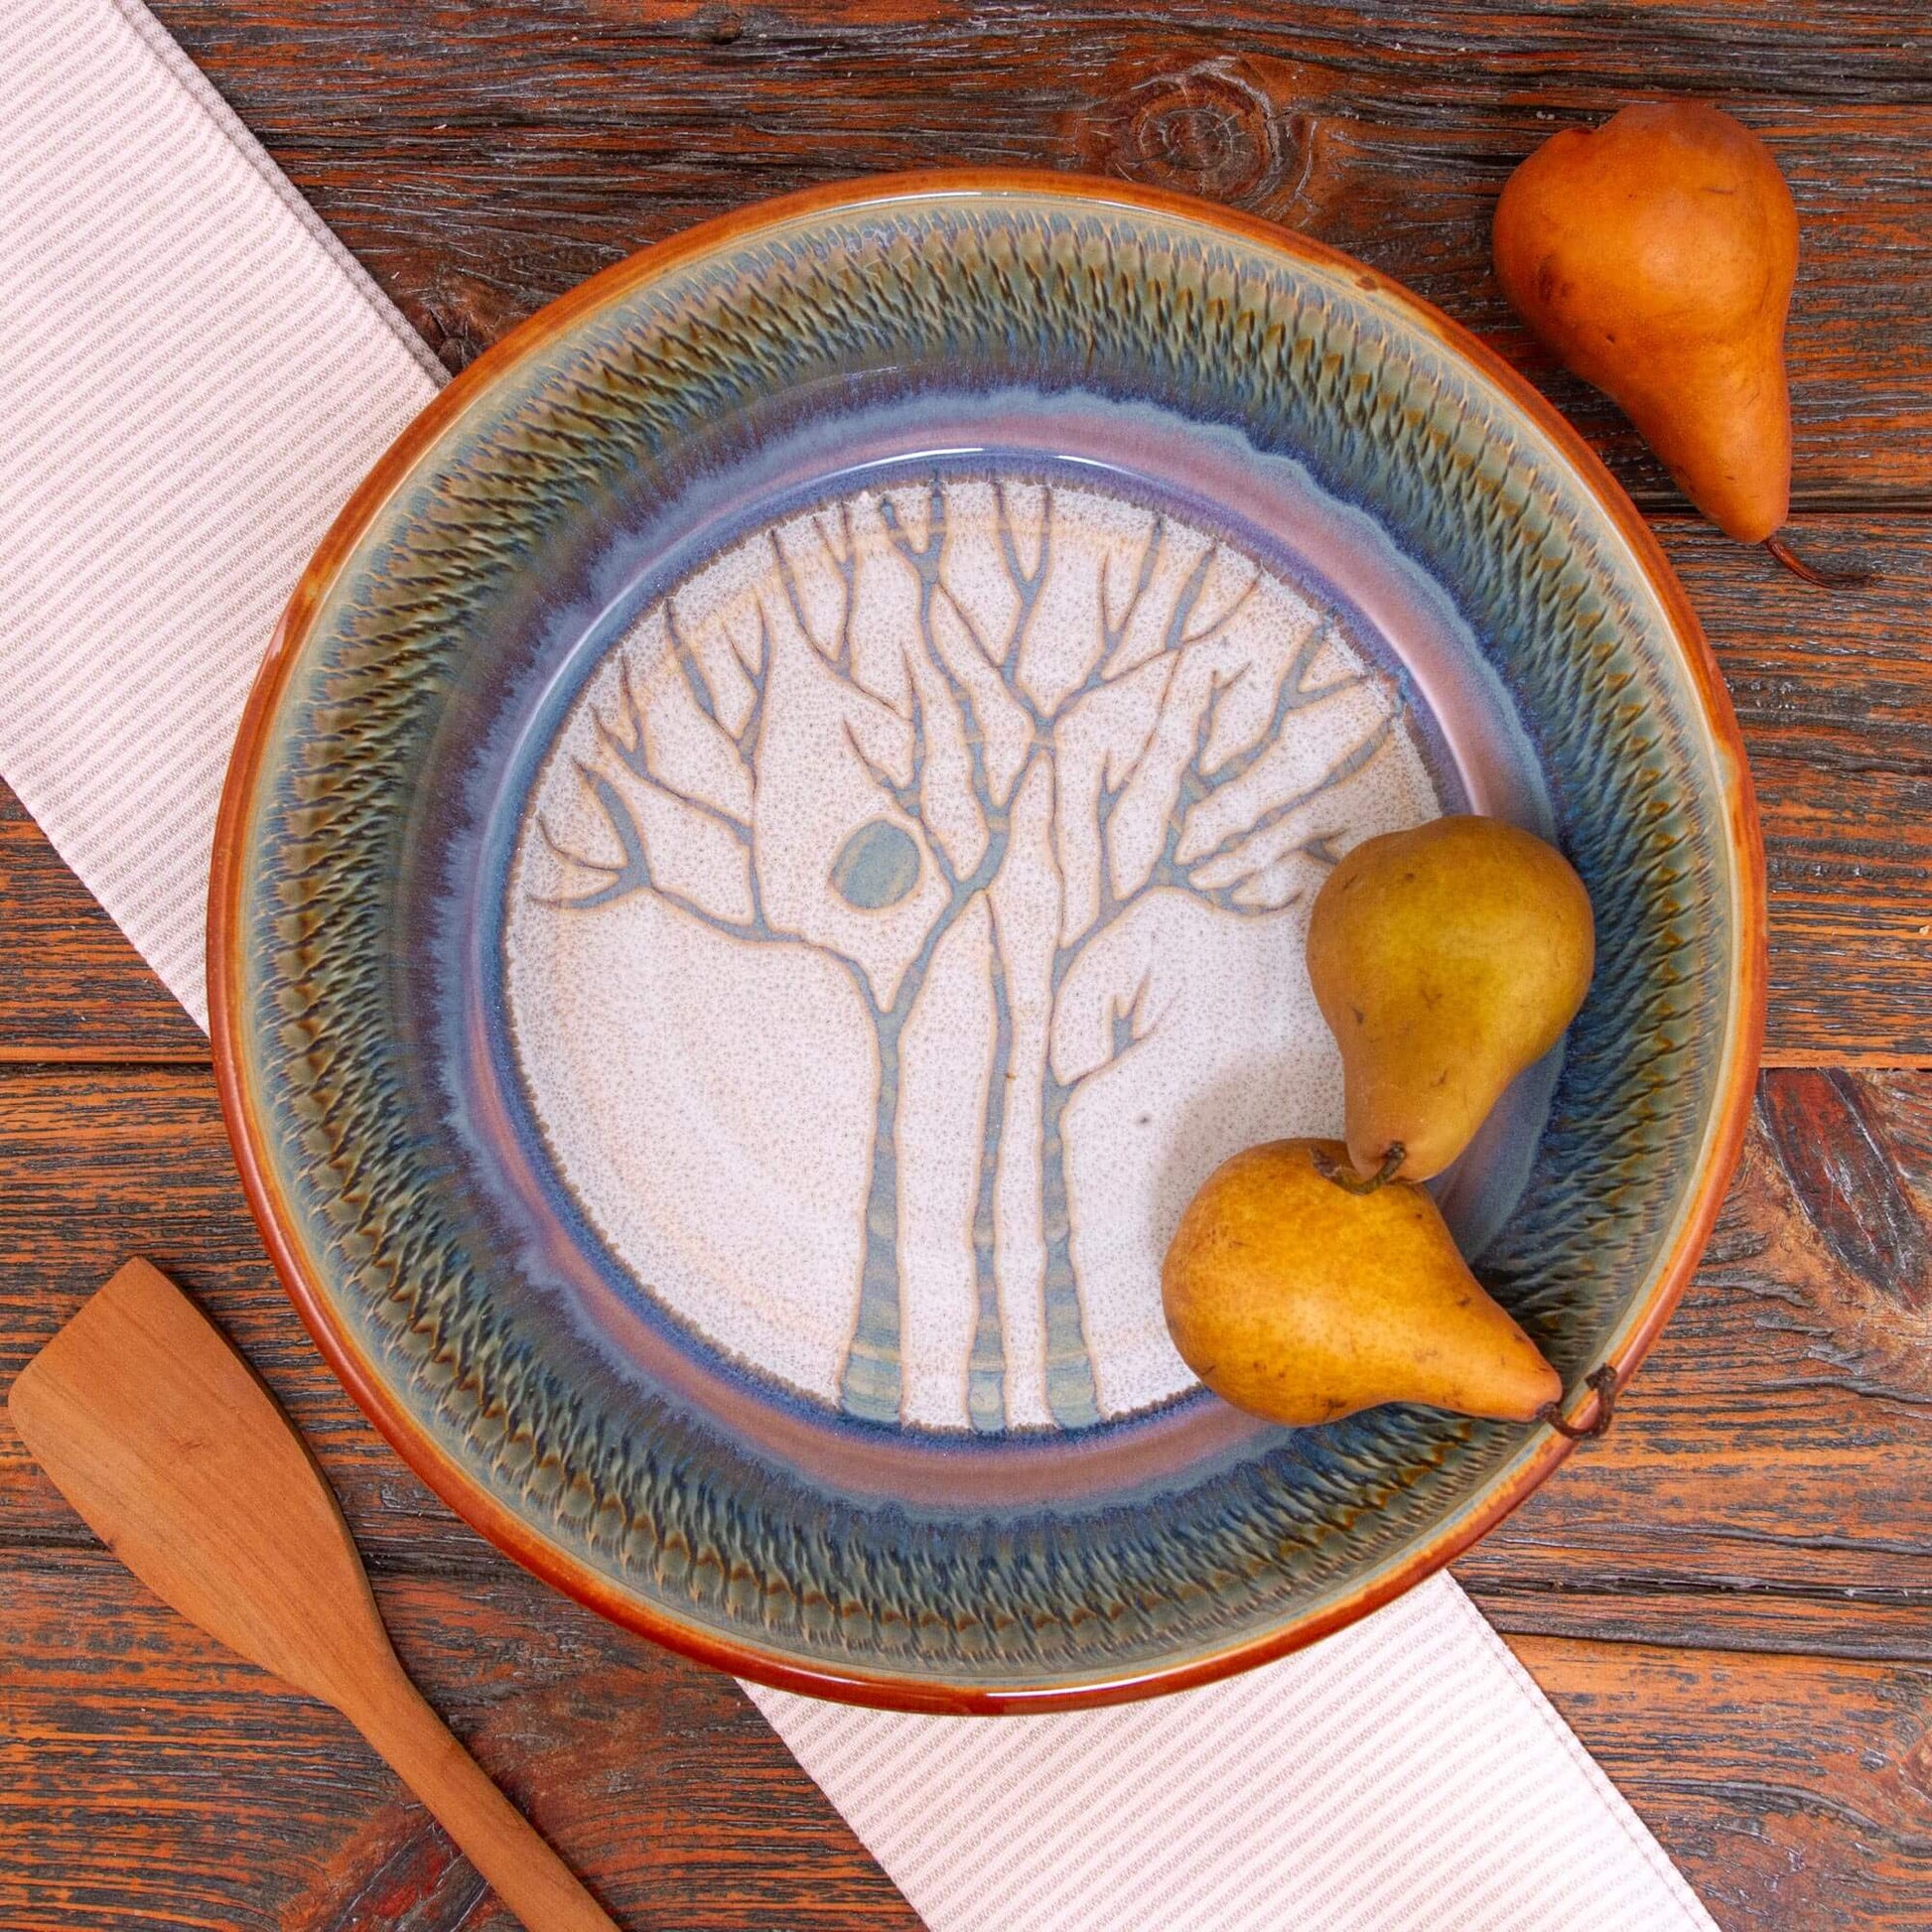 Handmade Pottery Harvest Bowl Bowl in Purple Tree pattern made by Georgetown Pottery in Maine